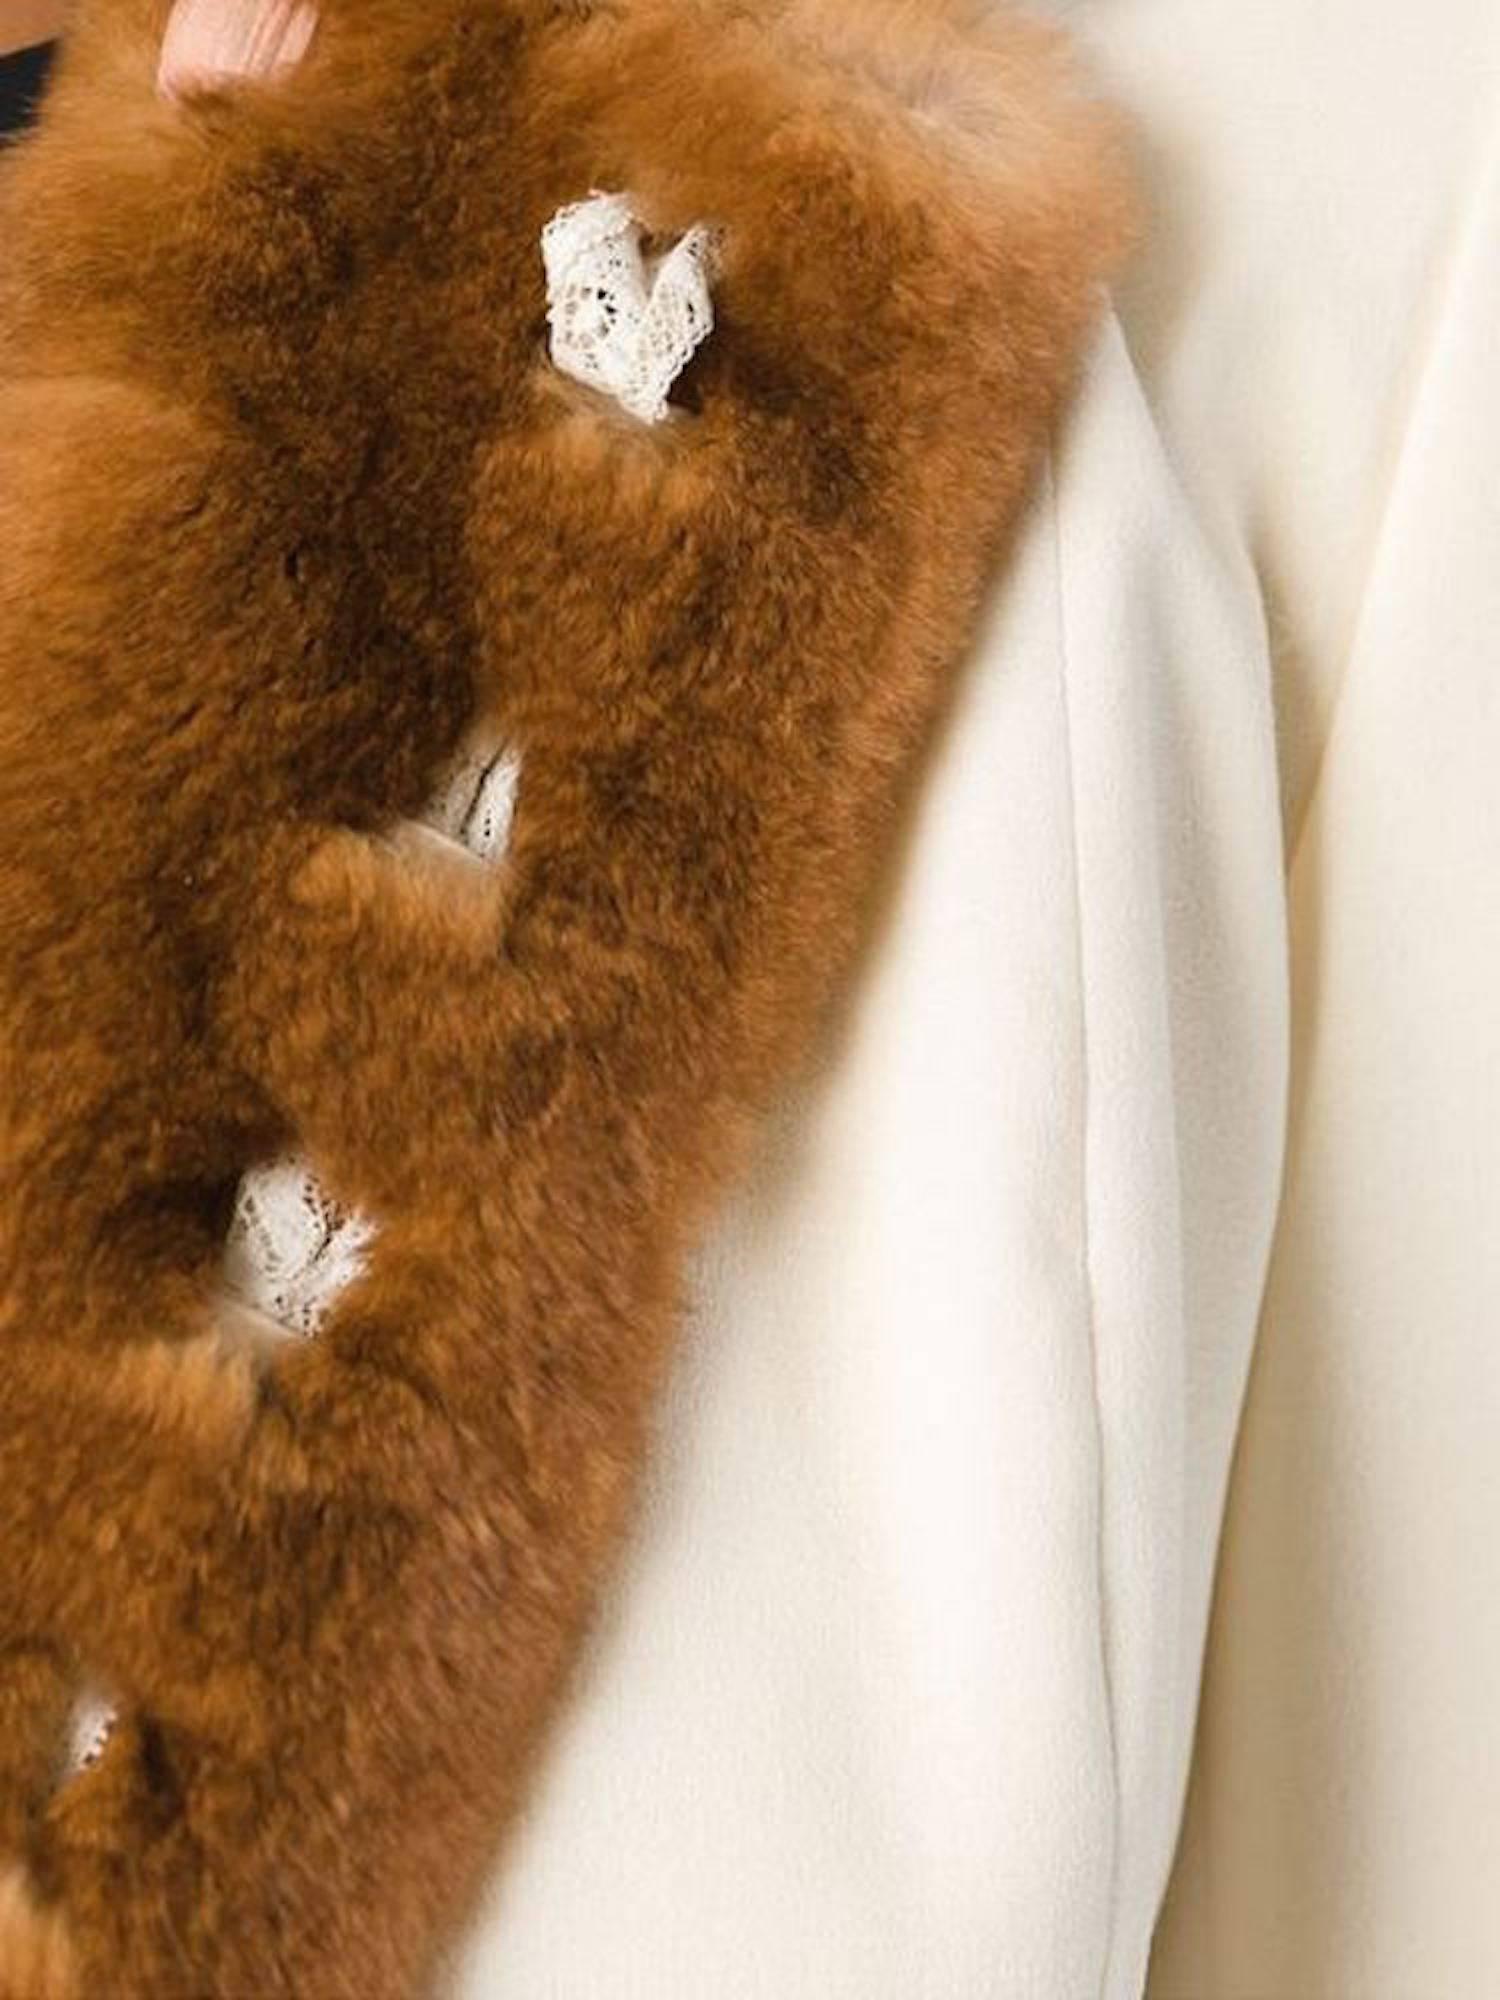 1990s Cream silk and wool Orylag fur trim jacket from John Galliano Vintage featuring a fur collar, long sleeves, a front button fastening, a fitted silhouette and fur cuffs. Excellent condition.
Size FR 38
Outer Composition:
wool 100%
Outer